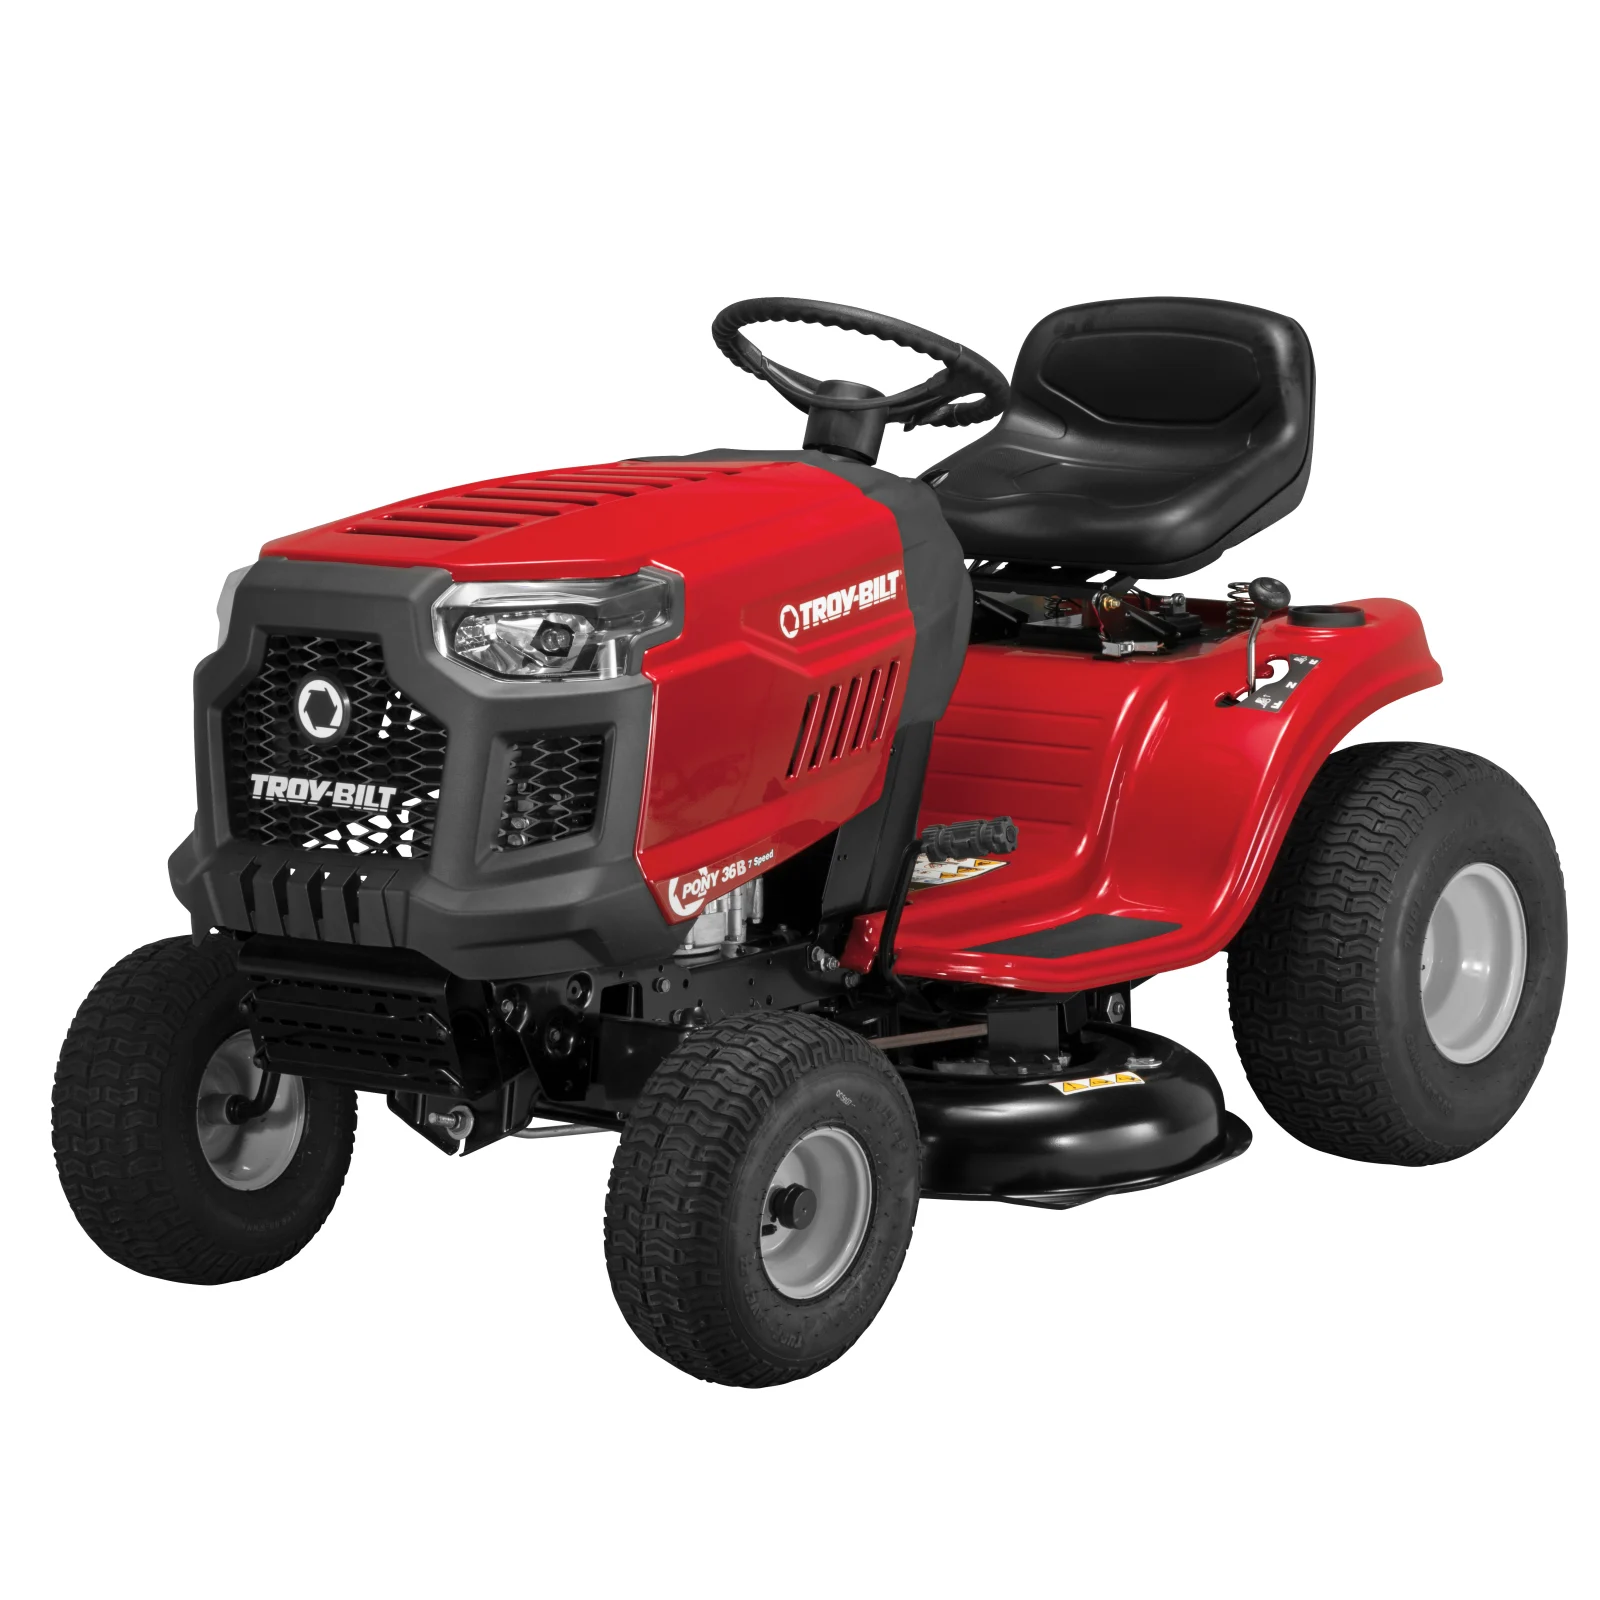 A red lawn tractor